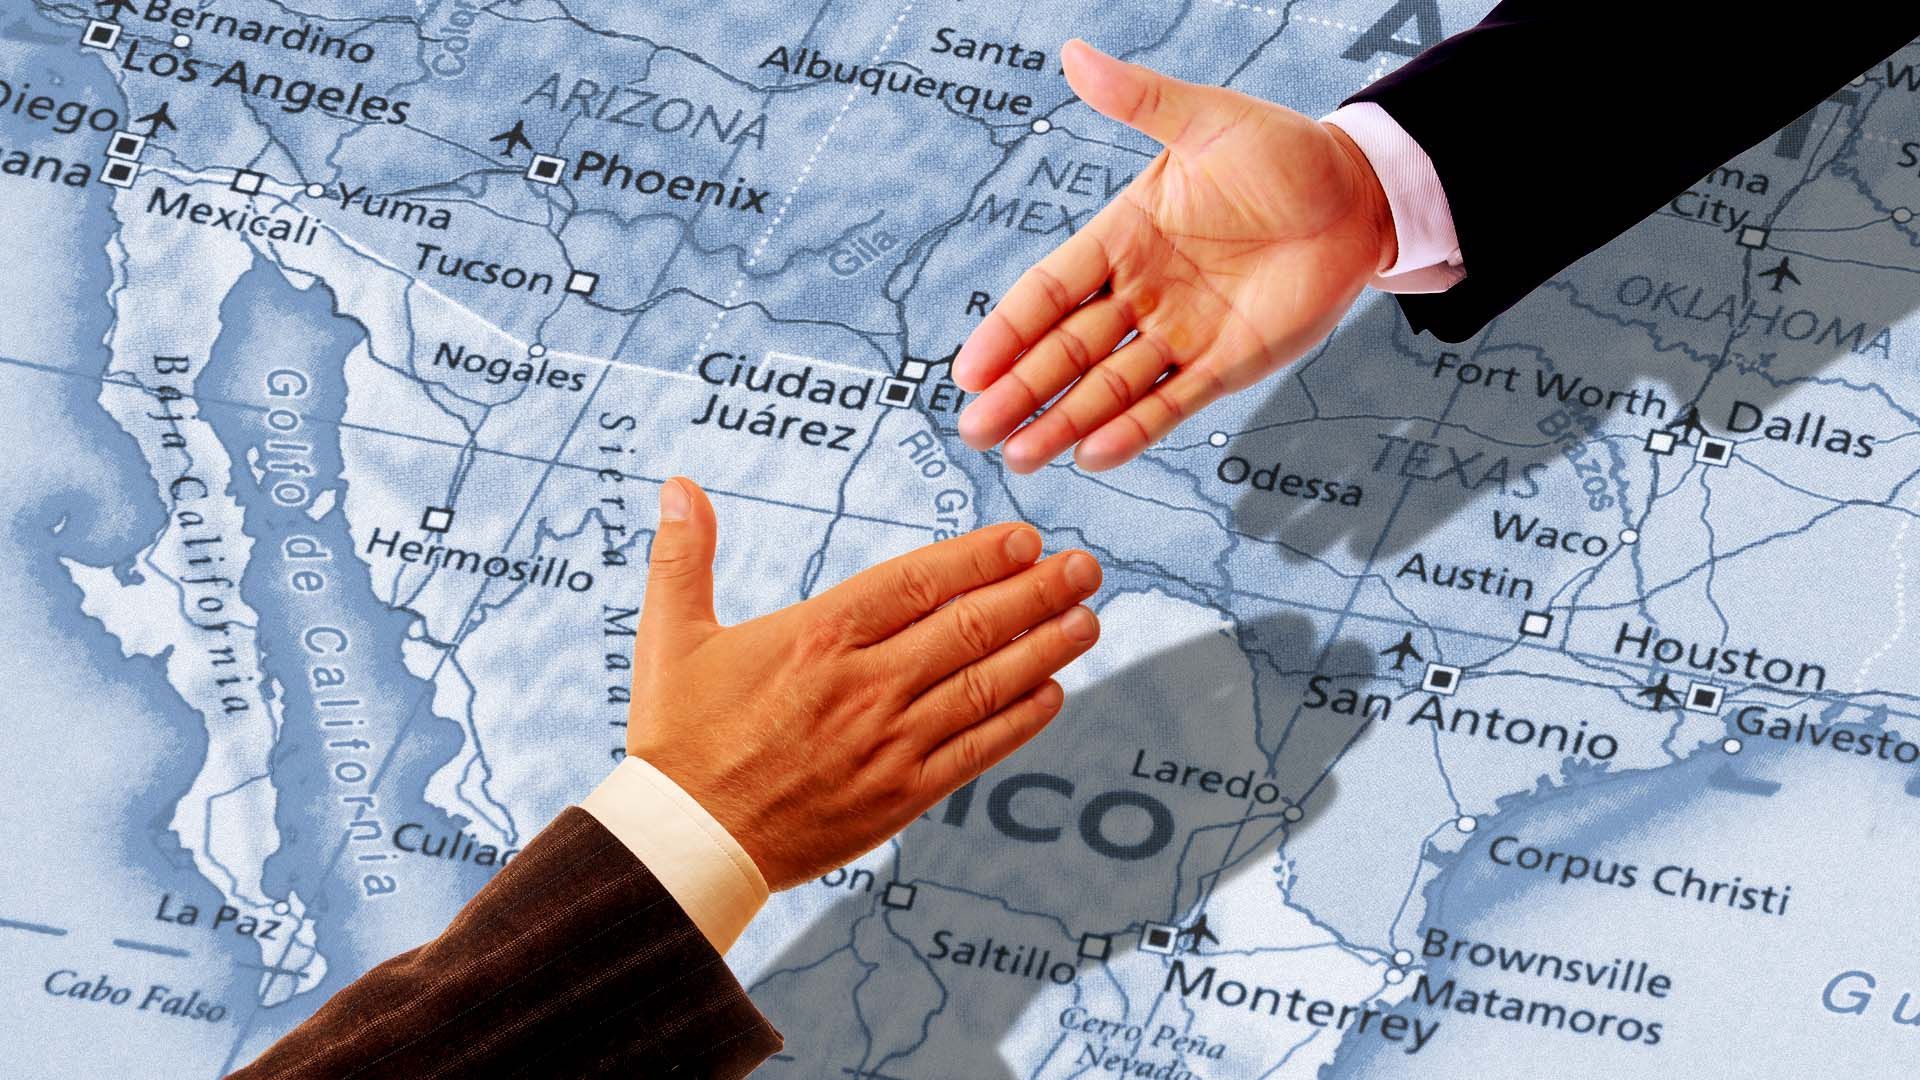 Illustration of hands reaching out but not shaking over a map of the U.S./Mexico border